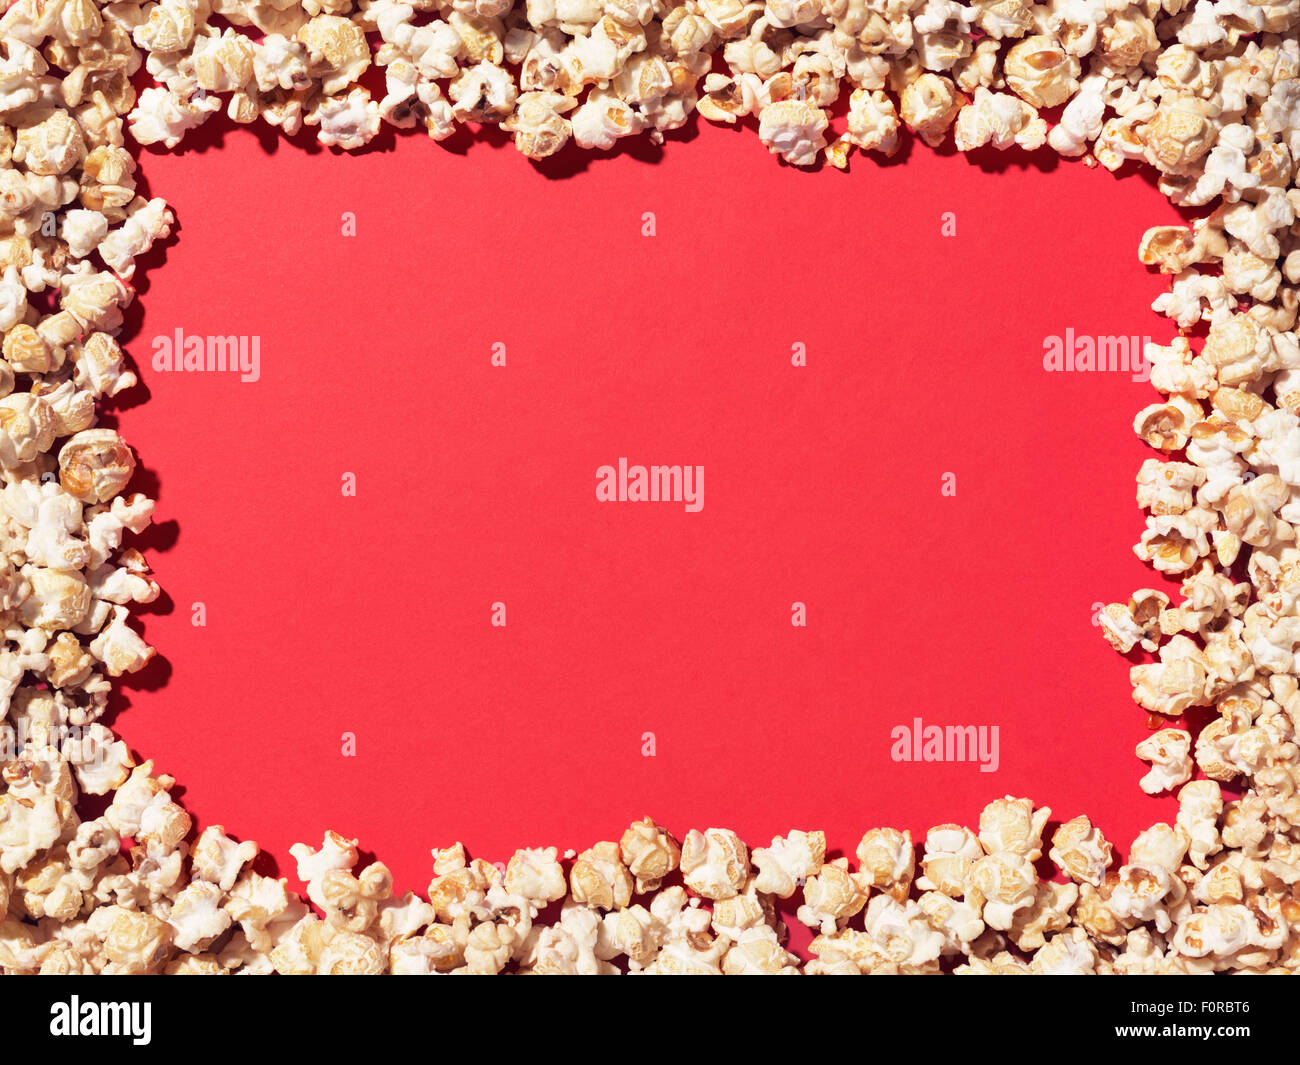 Shot of popcorn arranged to give a border to a plain, red area ideal for designer to add copy. Stock Photo